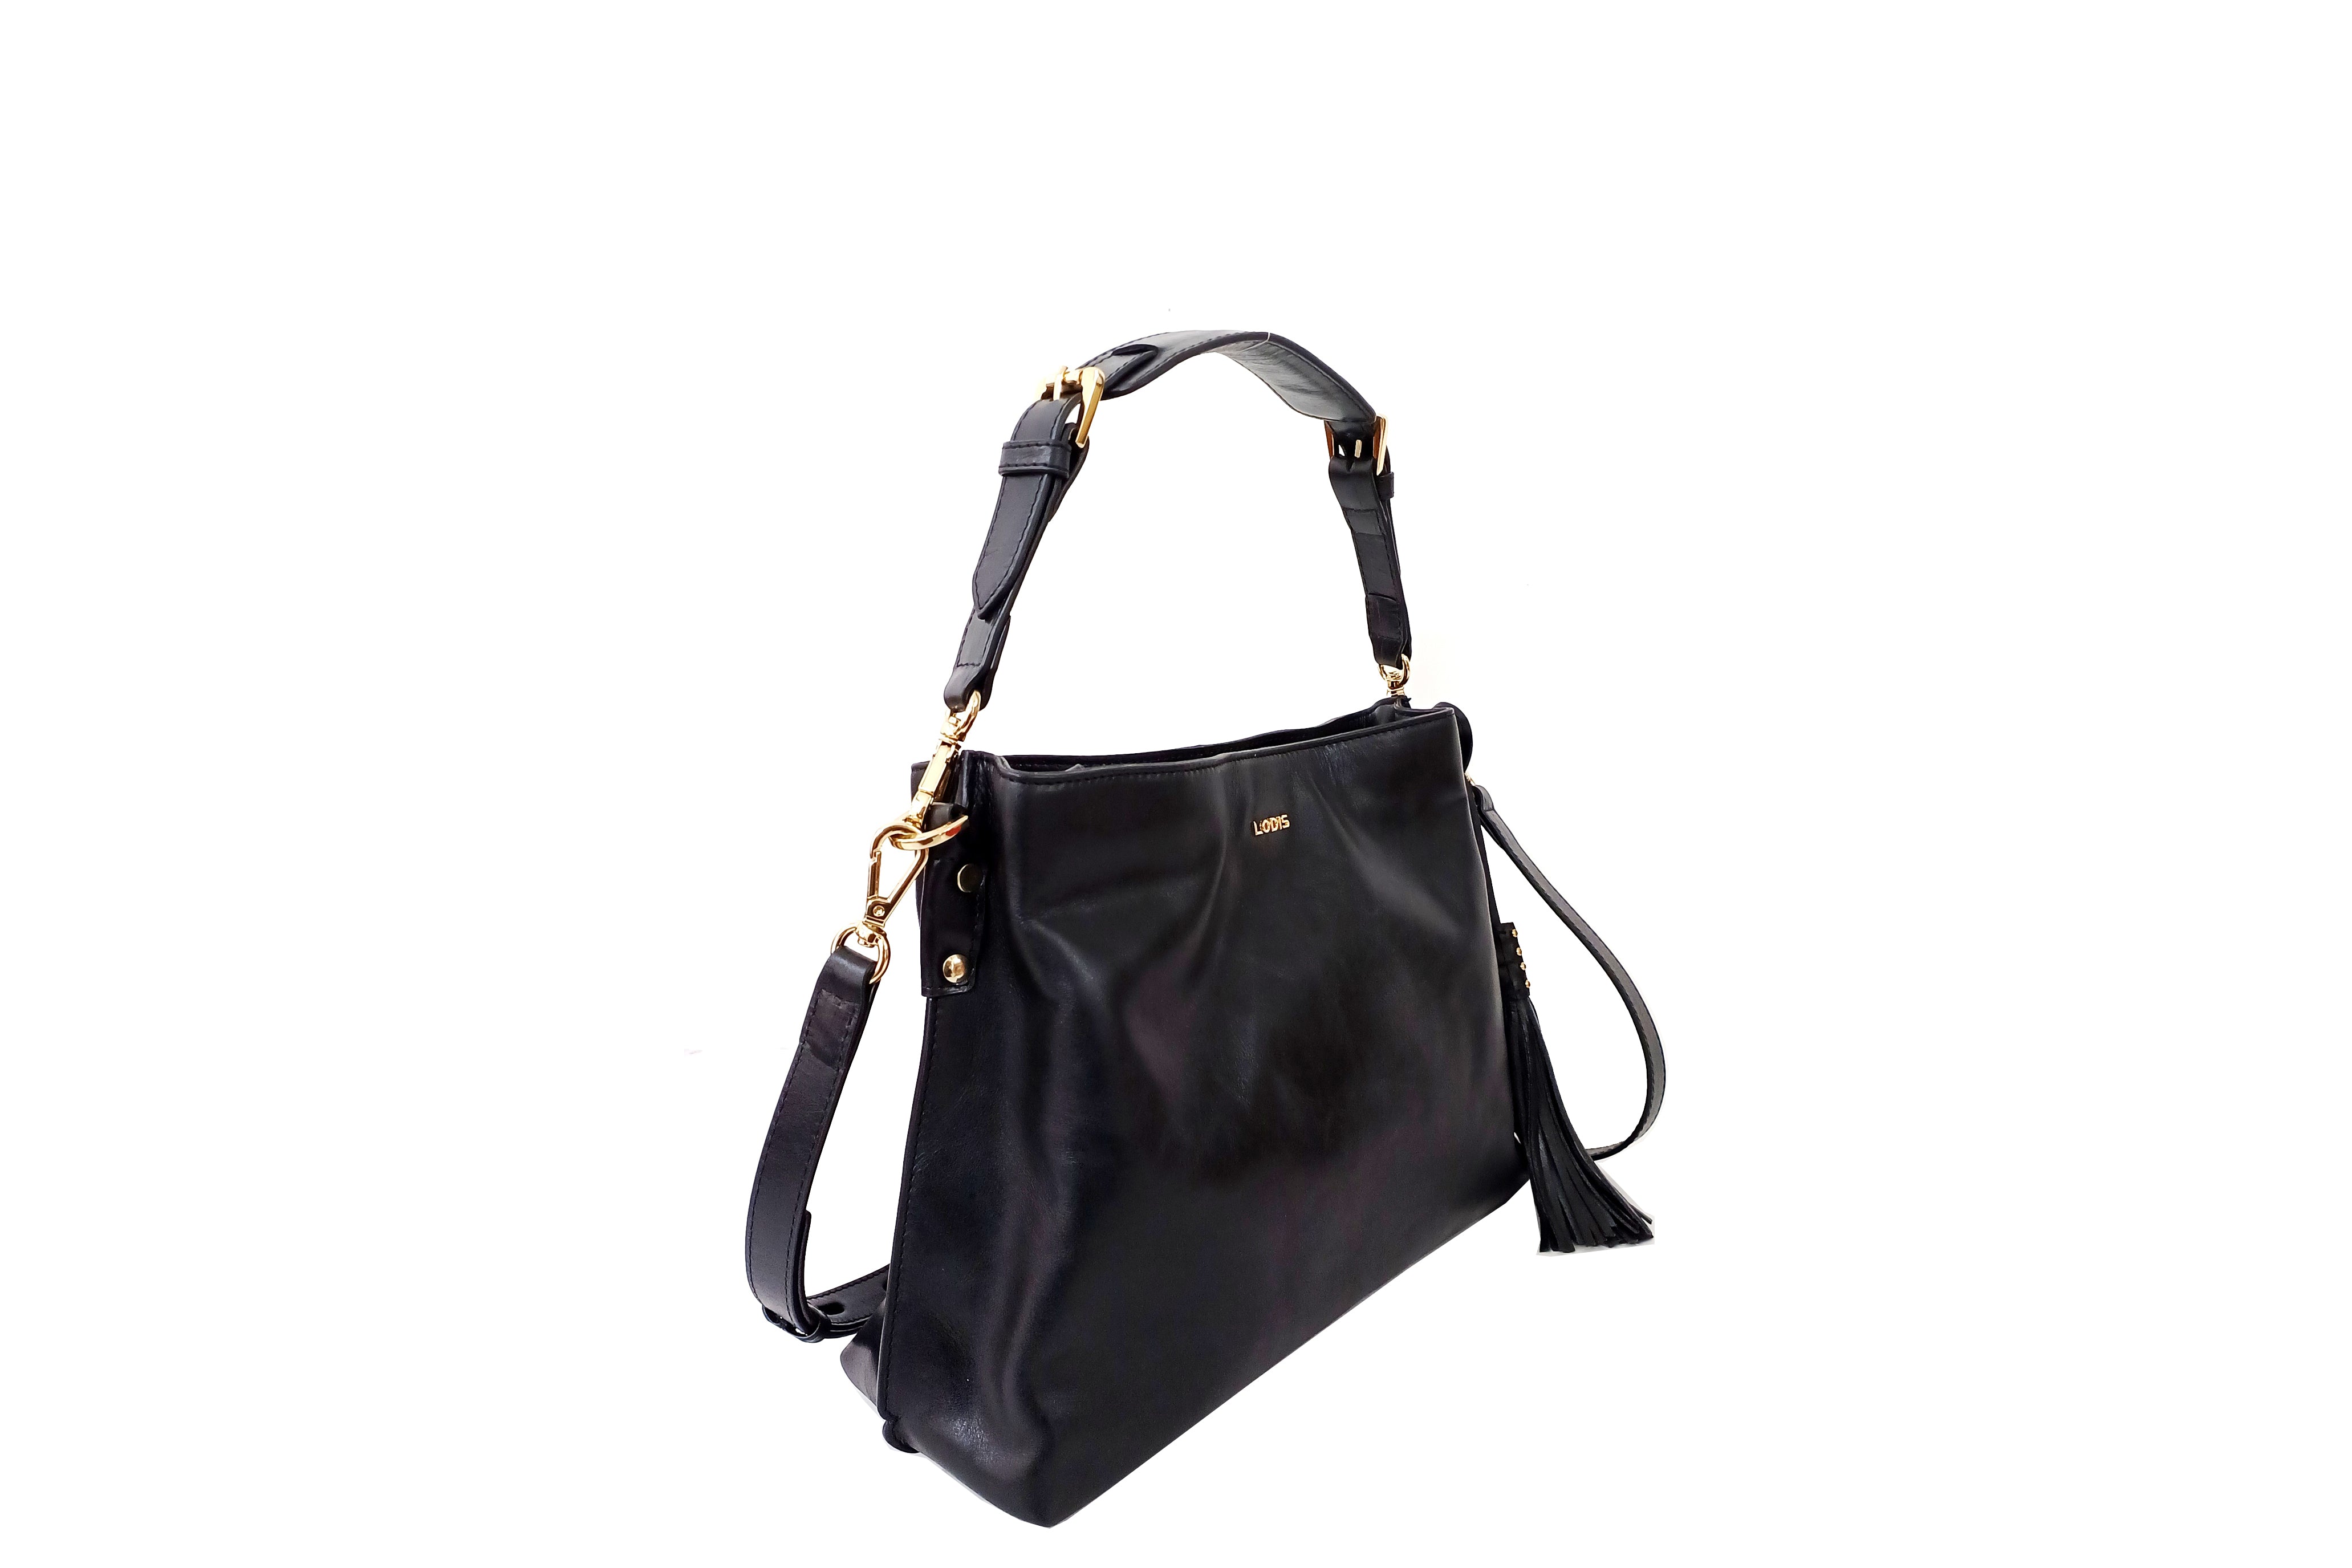 Shop Now The Luxurious Darcy Leather Bag | Lodis 